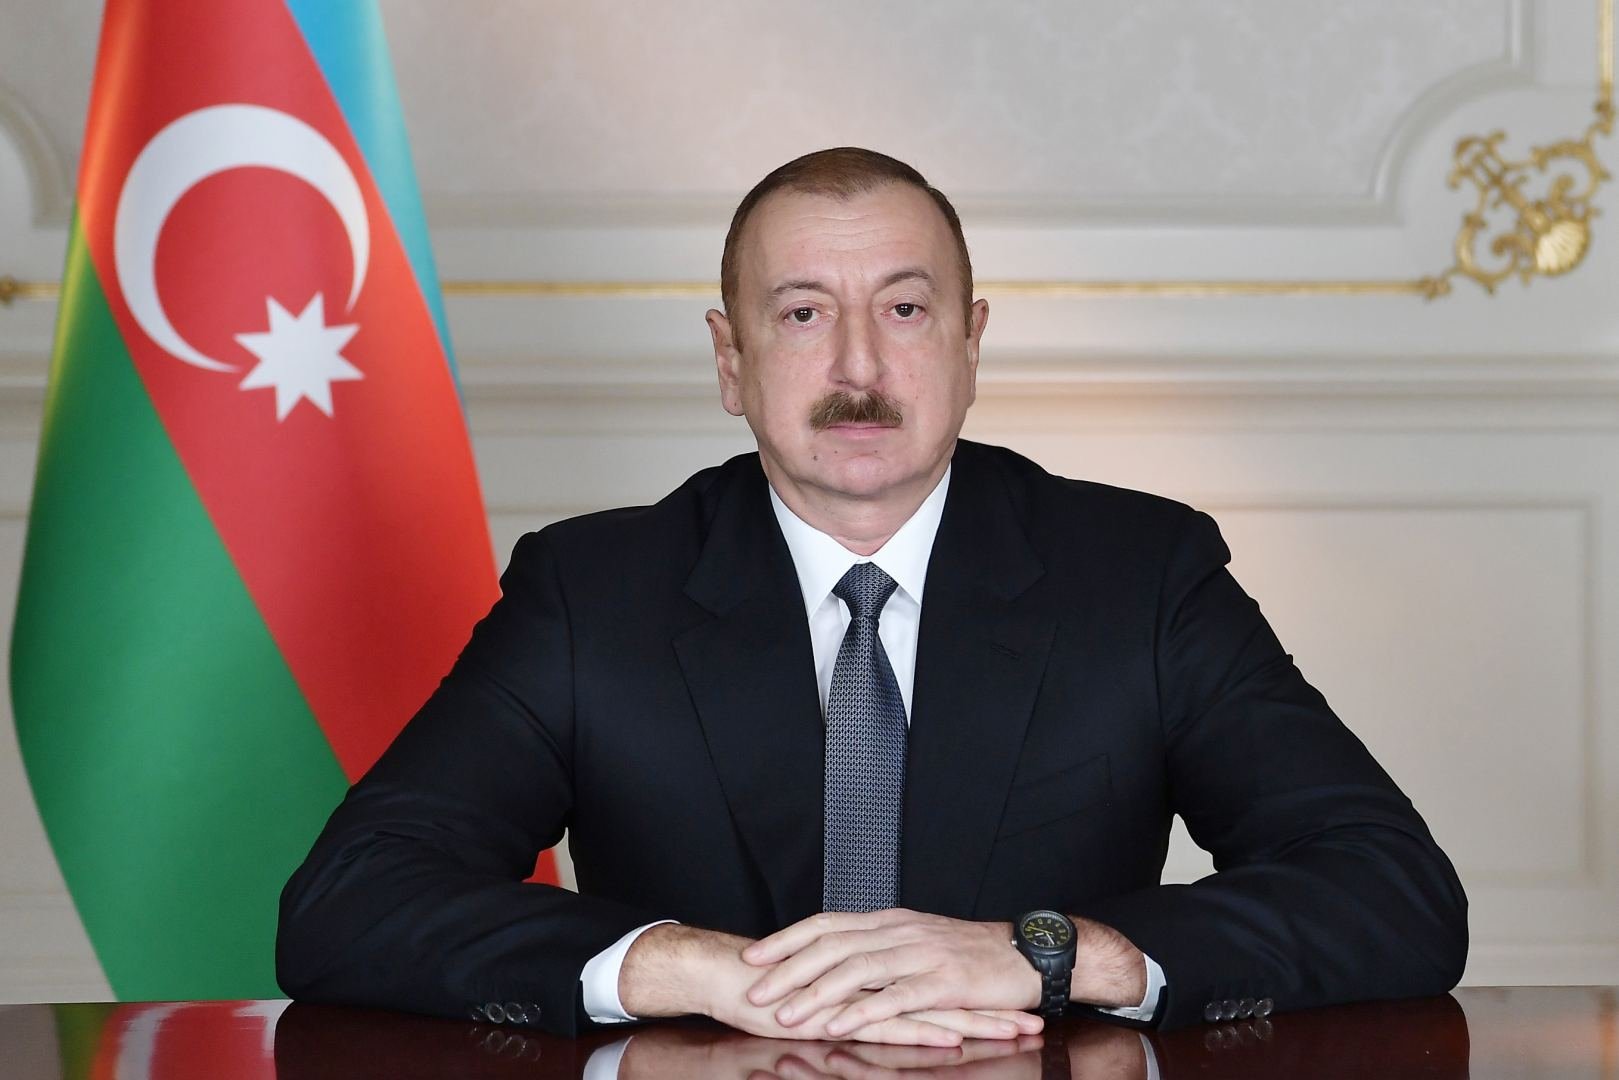 President Ilham Aliyev spoke about Azerbaijani soldiers who went astray and crossed into territory of Armenia some time ago